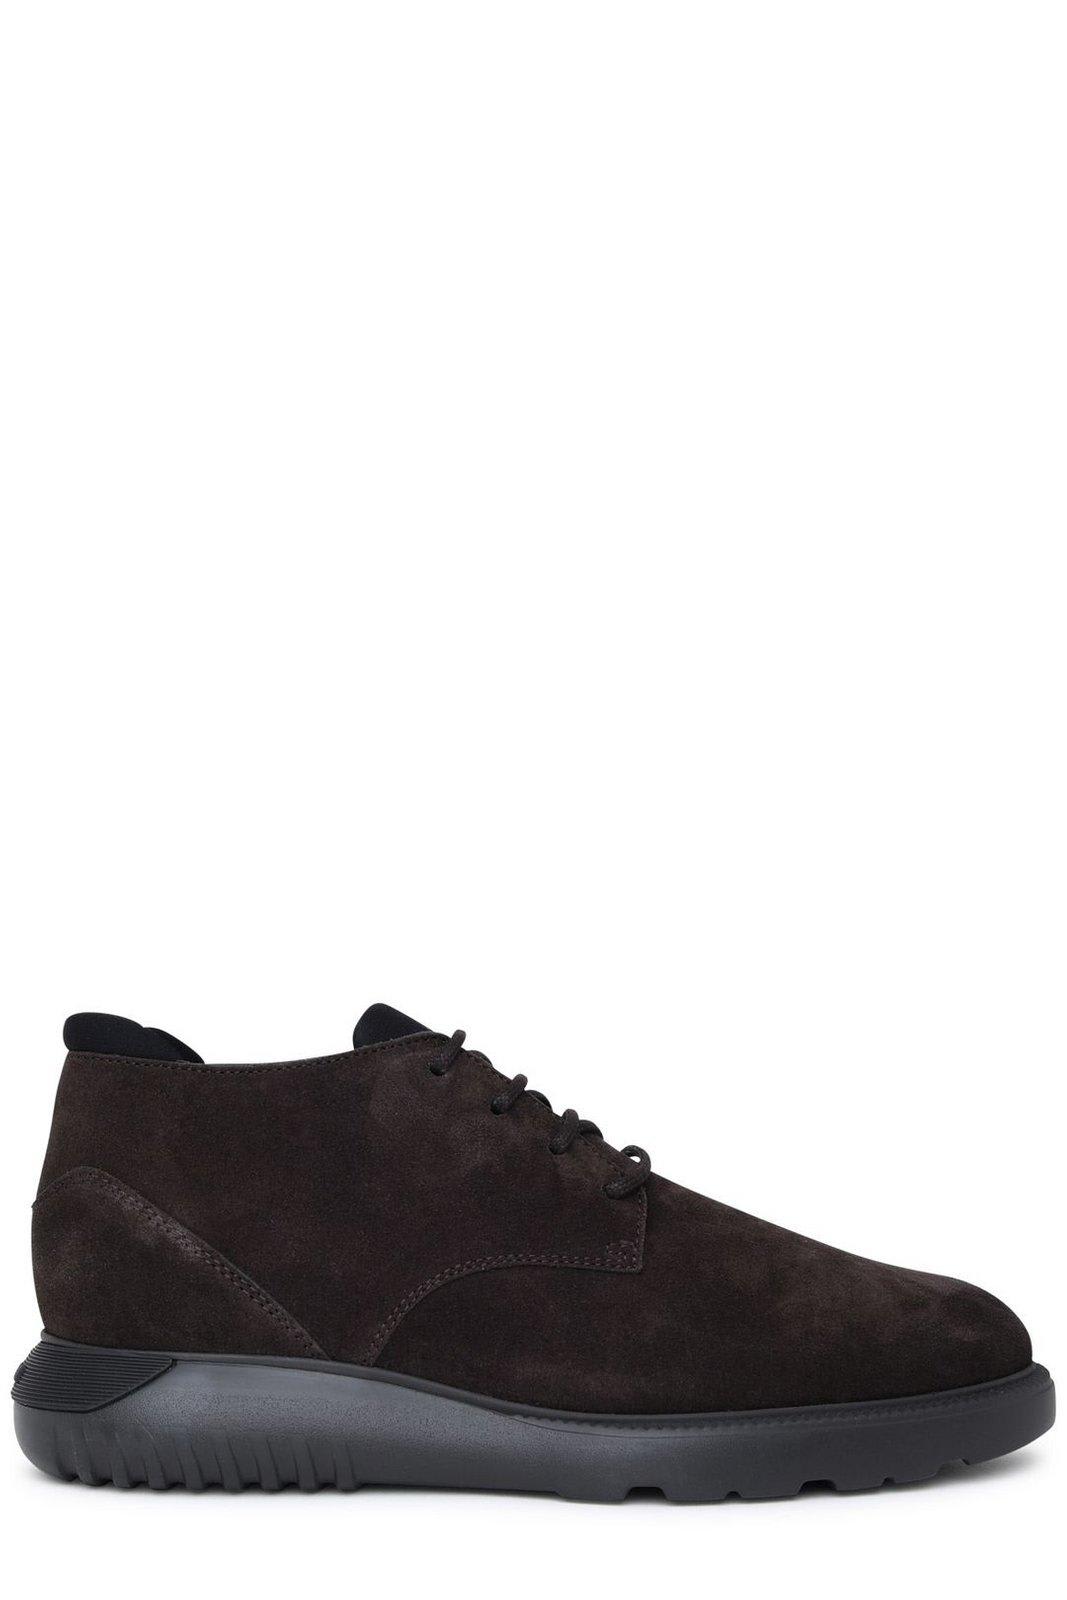 Hogan Lace-up Desert Boots In Black